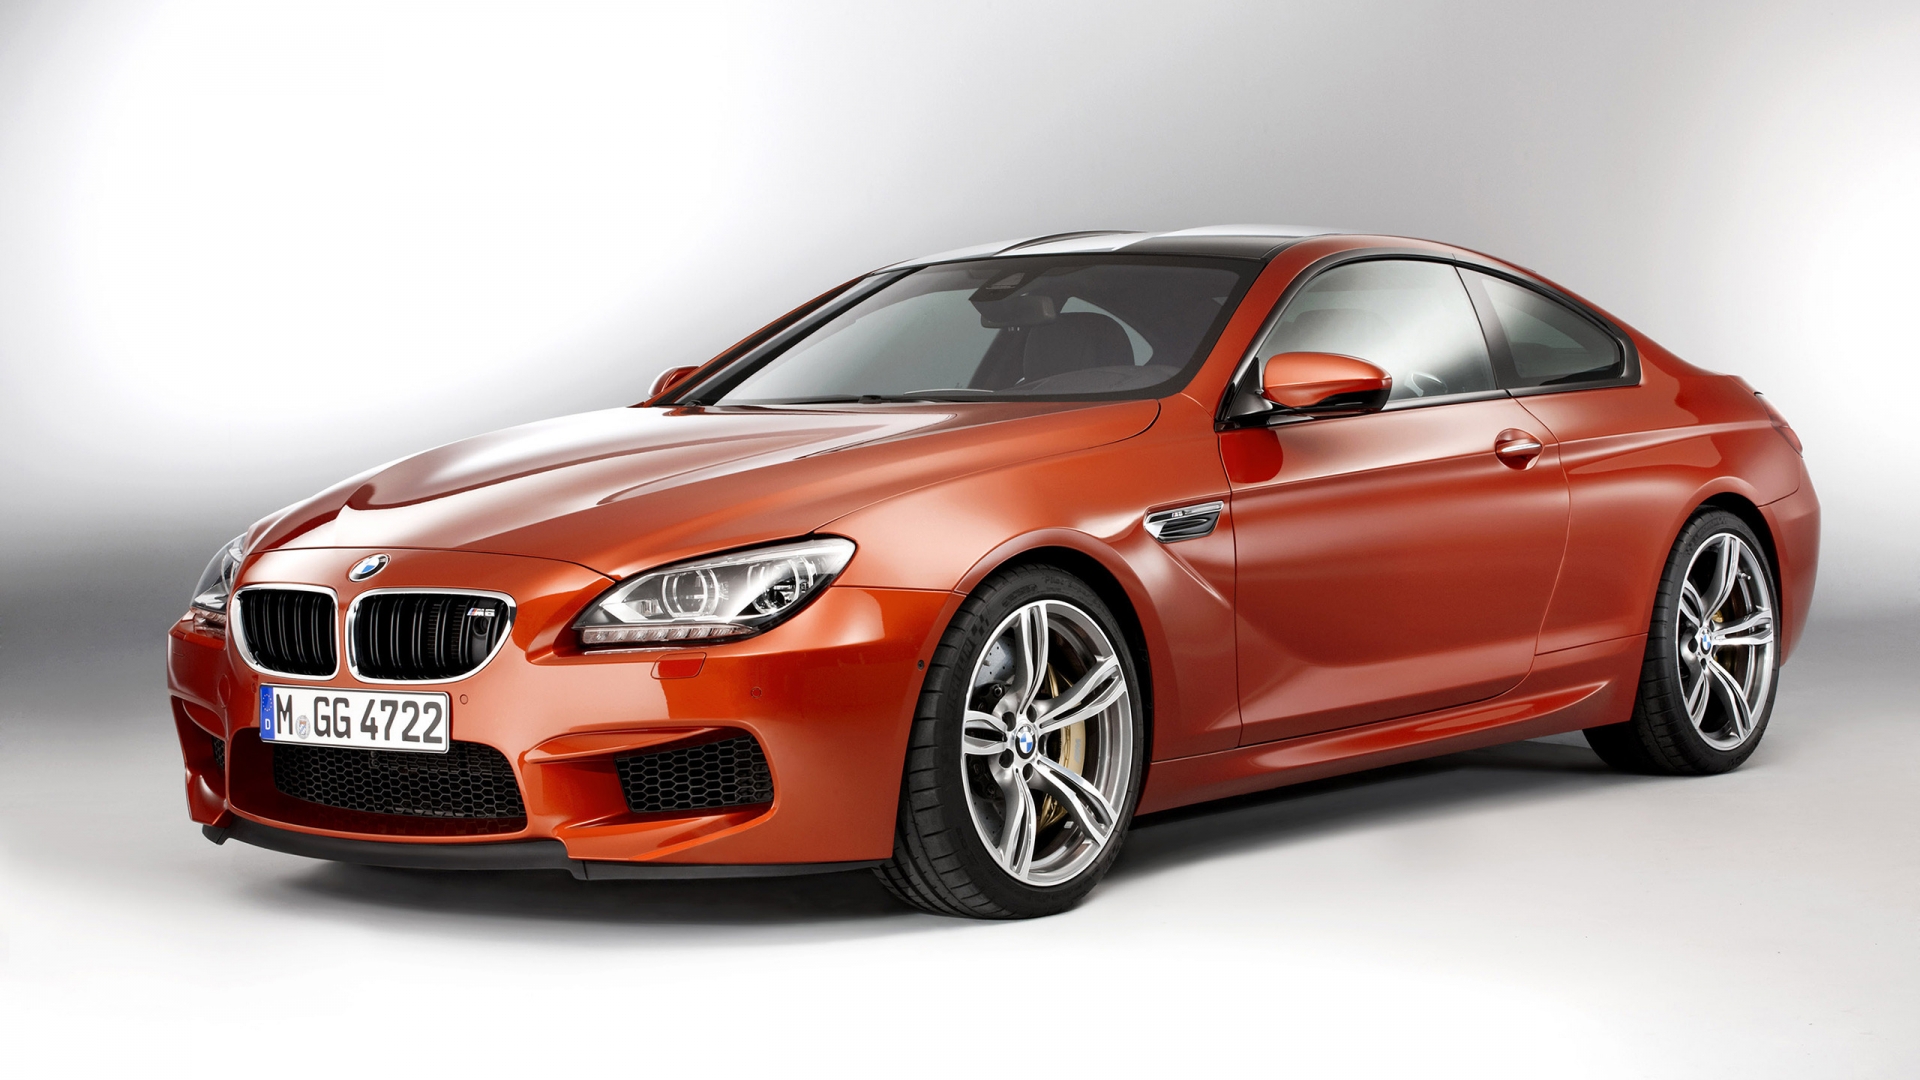 2013 BMW M6 Coupe Studio for 1920 x 1080 HDTV 1080p resolution